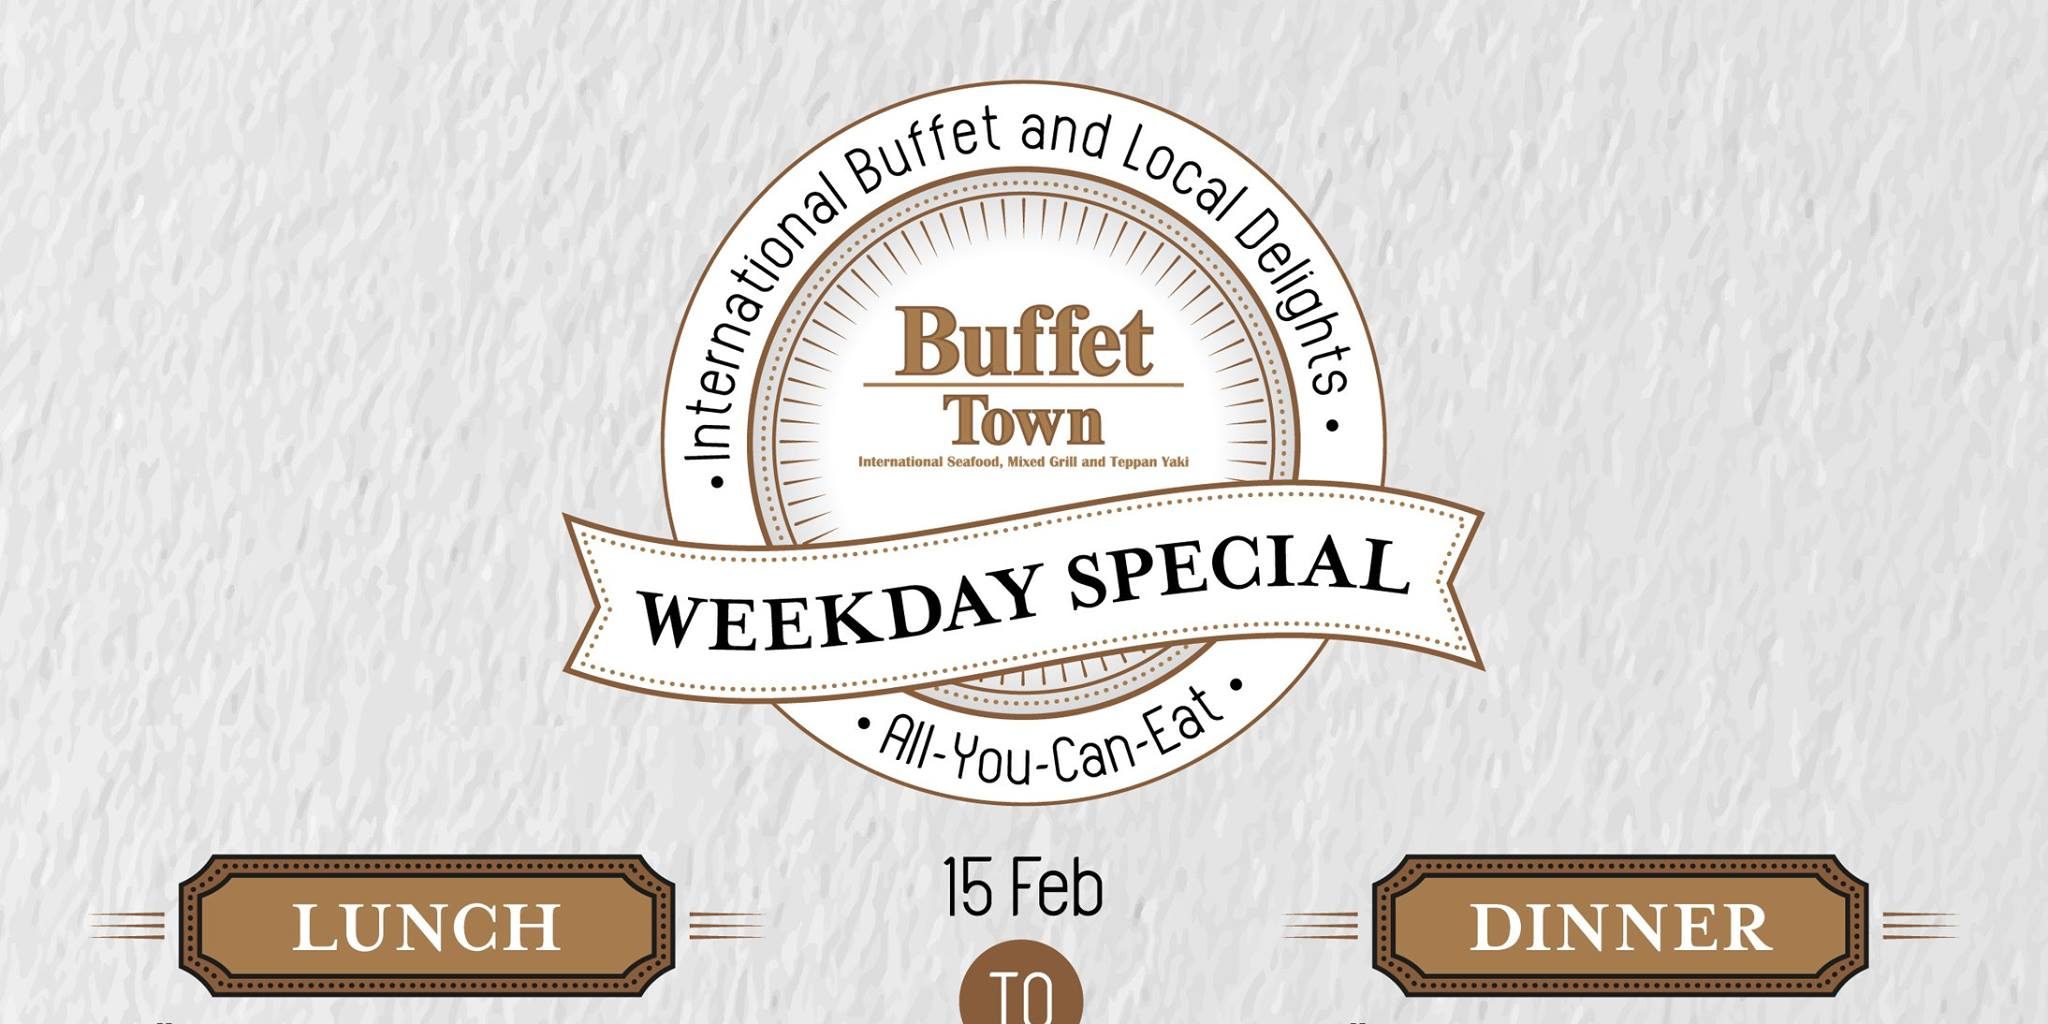 Buffet Town Singapore Weekday Special Promotion 15 Feb – 16 Mar 2017